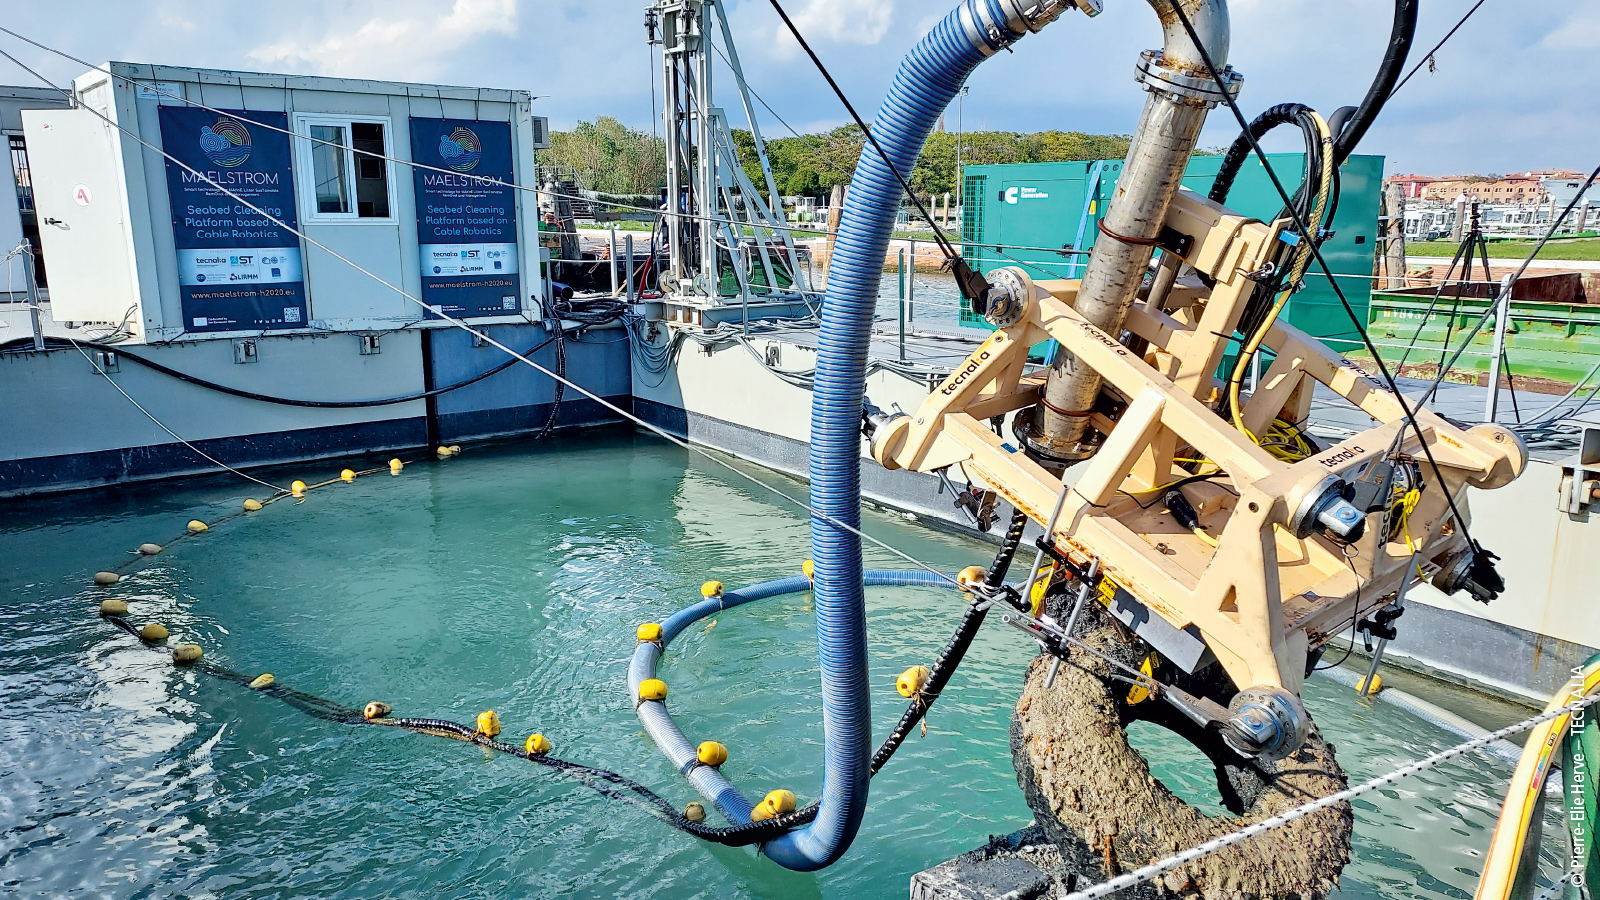 As part of the MAELSTROM research project, a cable robot was developed that can remove small particles via suction cups and retrieve waste weighing up to 130 kg from depths of up to 20 meters using a gripper. 